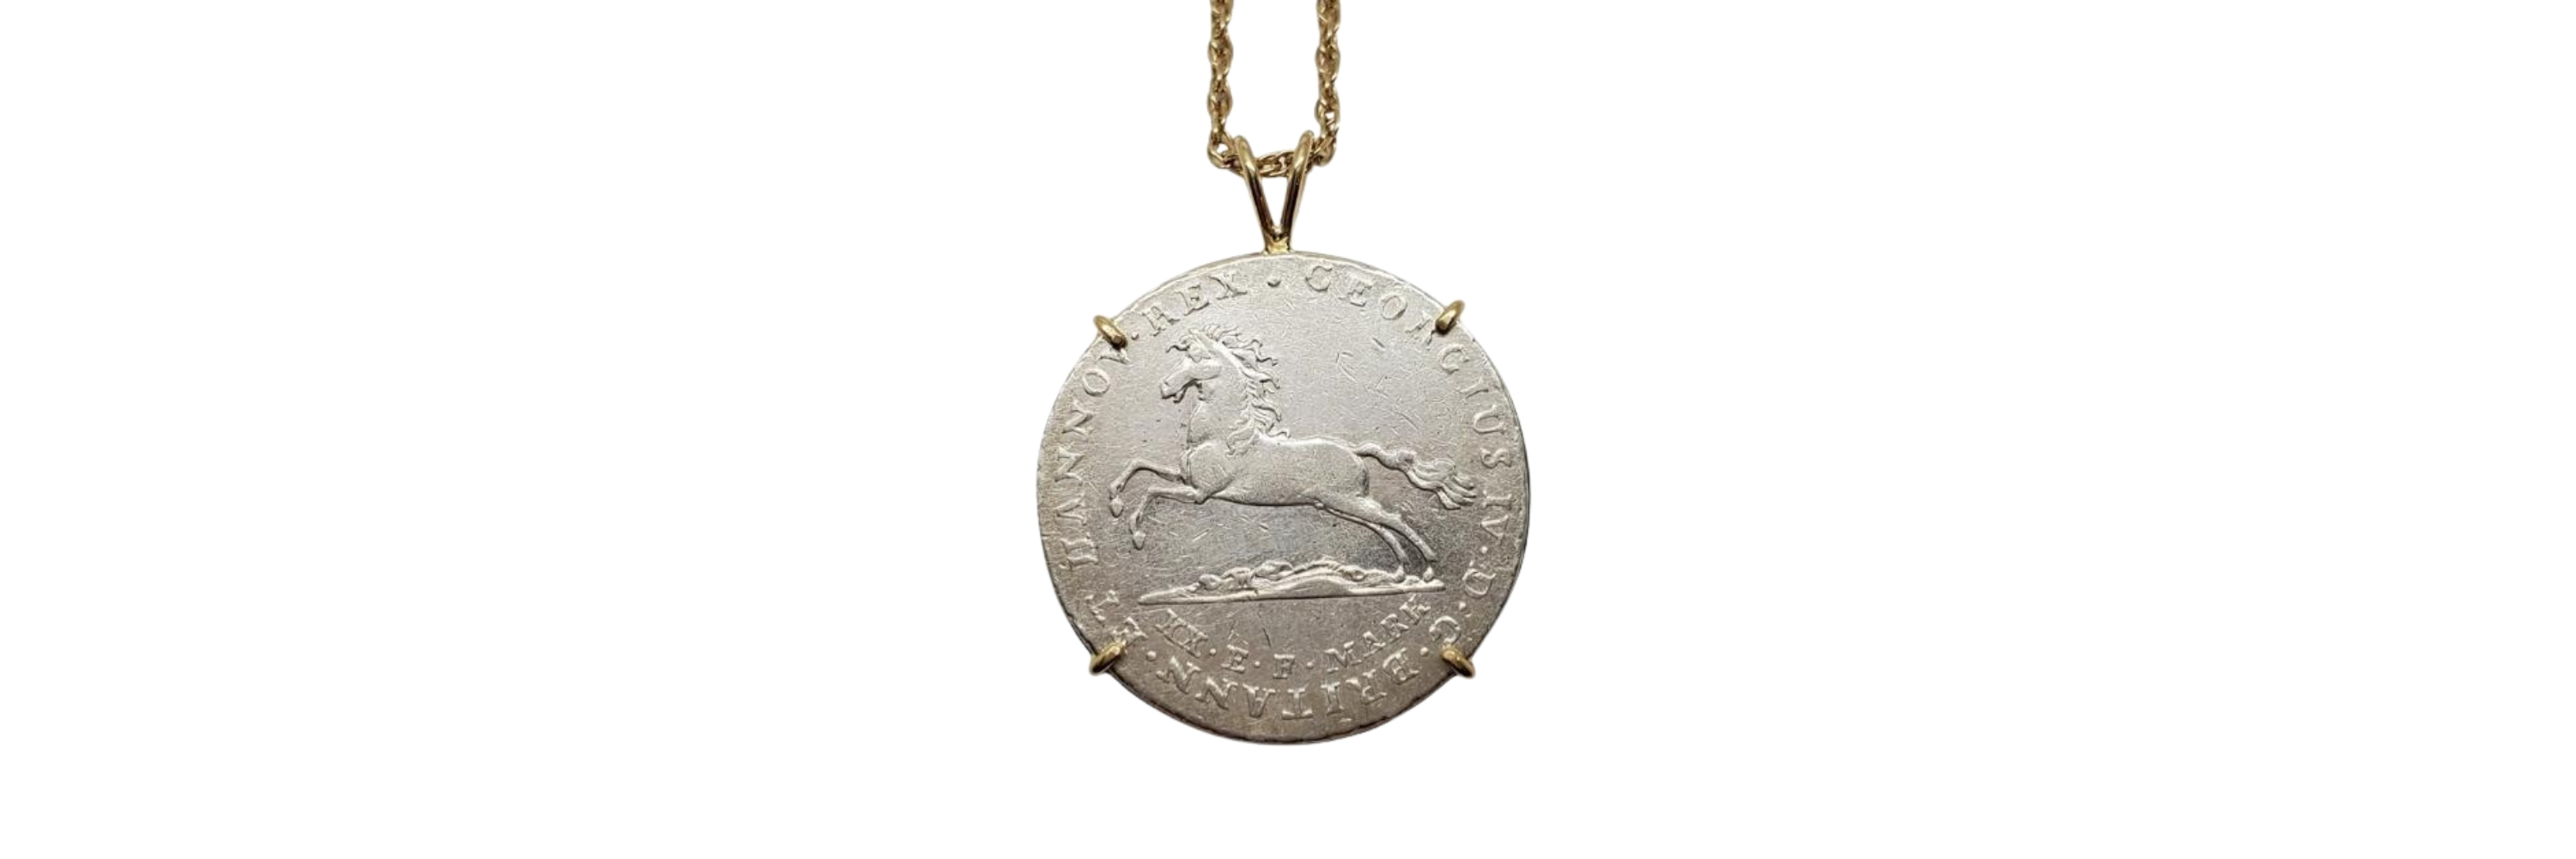 Equestrian inspired antique coins set into jewelry